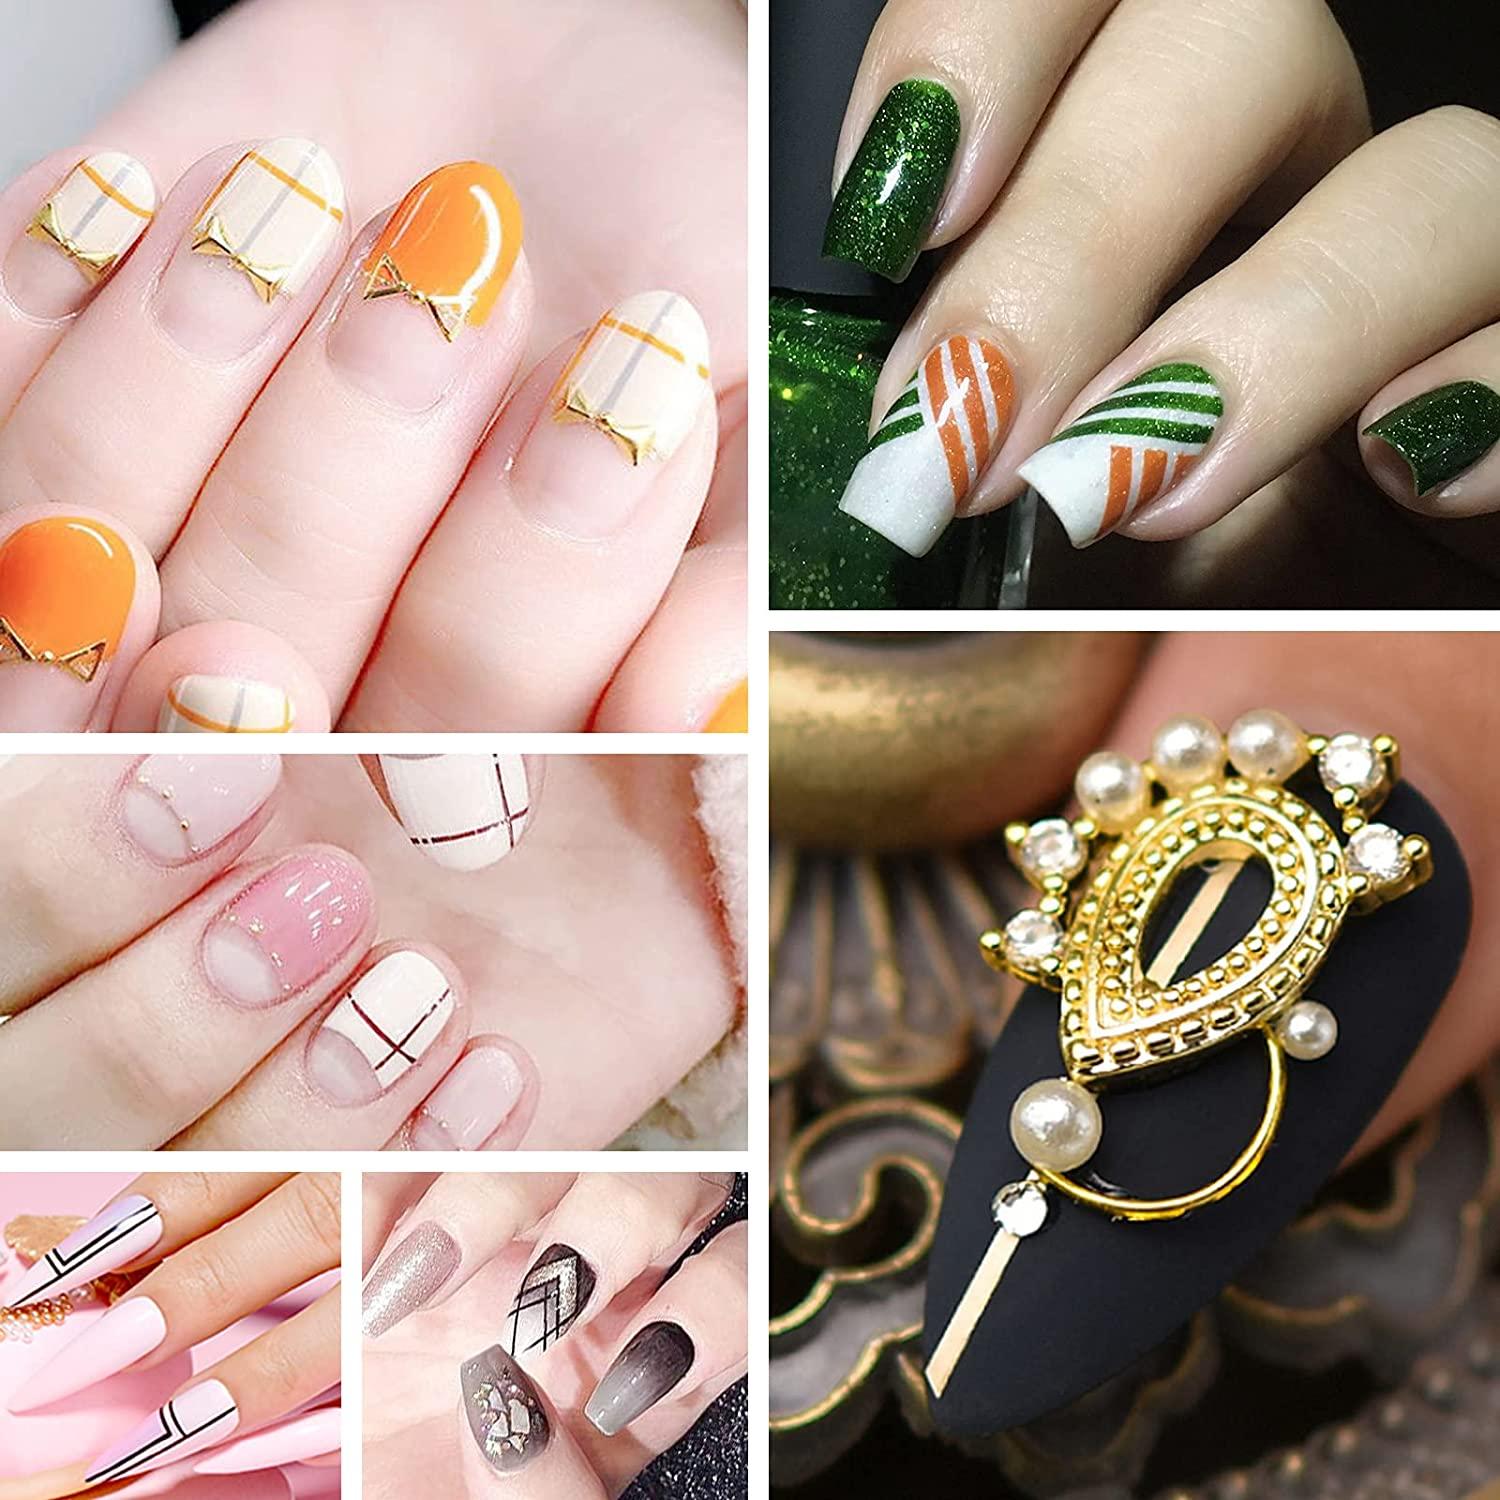 Cute Easter Nail Designs - 23 Nails Looks to Try For Easter Sunday